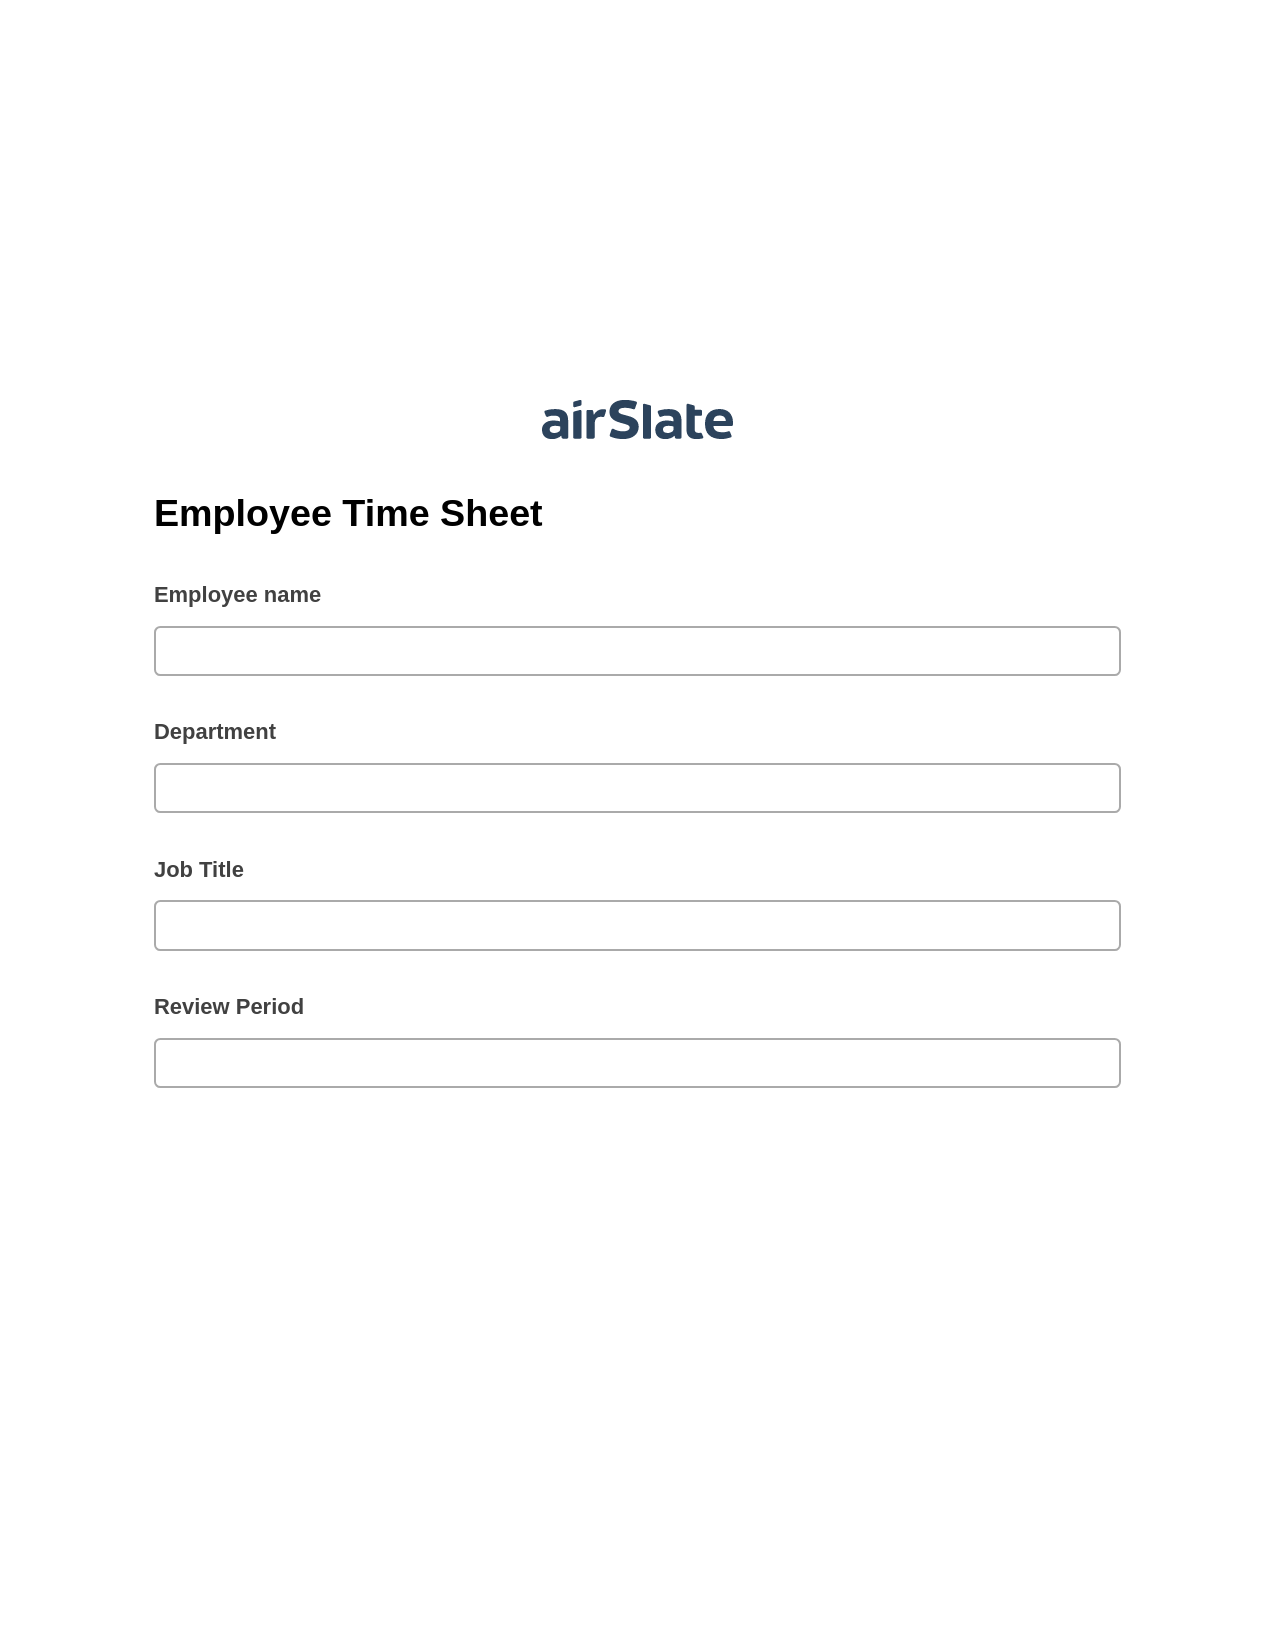 Multirole Employee Time Sheet Pre-fill from Excel Spreadsheet Bot, Slack Notification Bot, Archive to Dropbox Bot